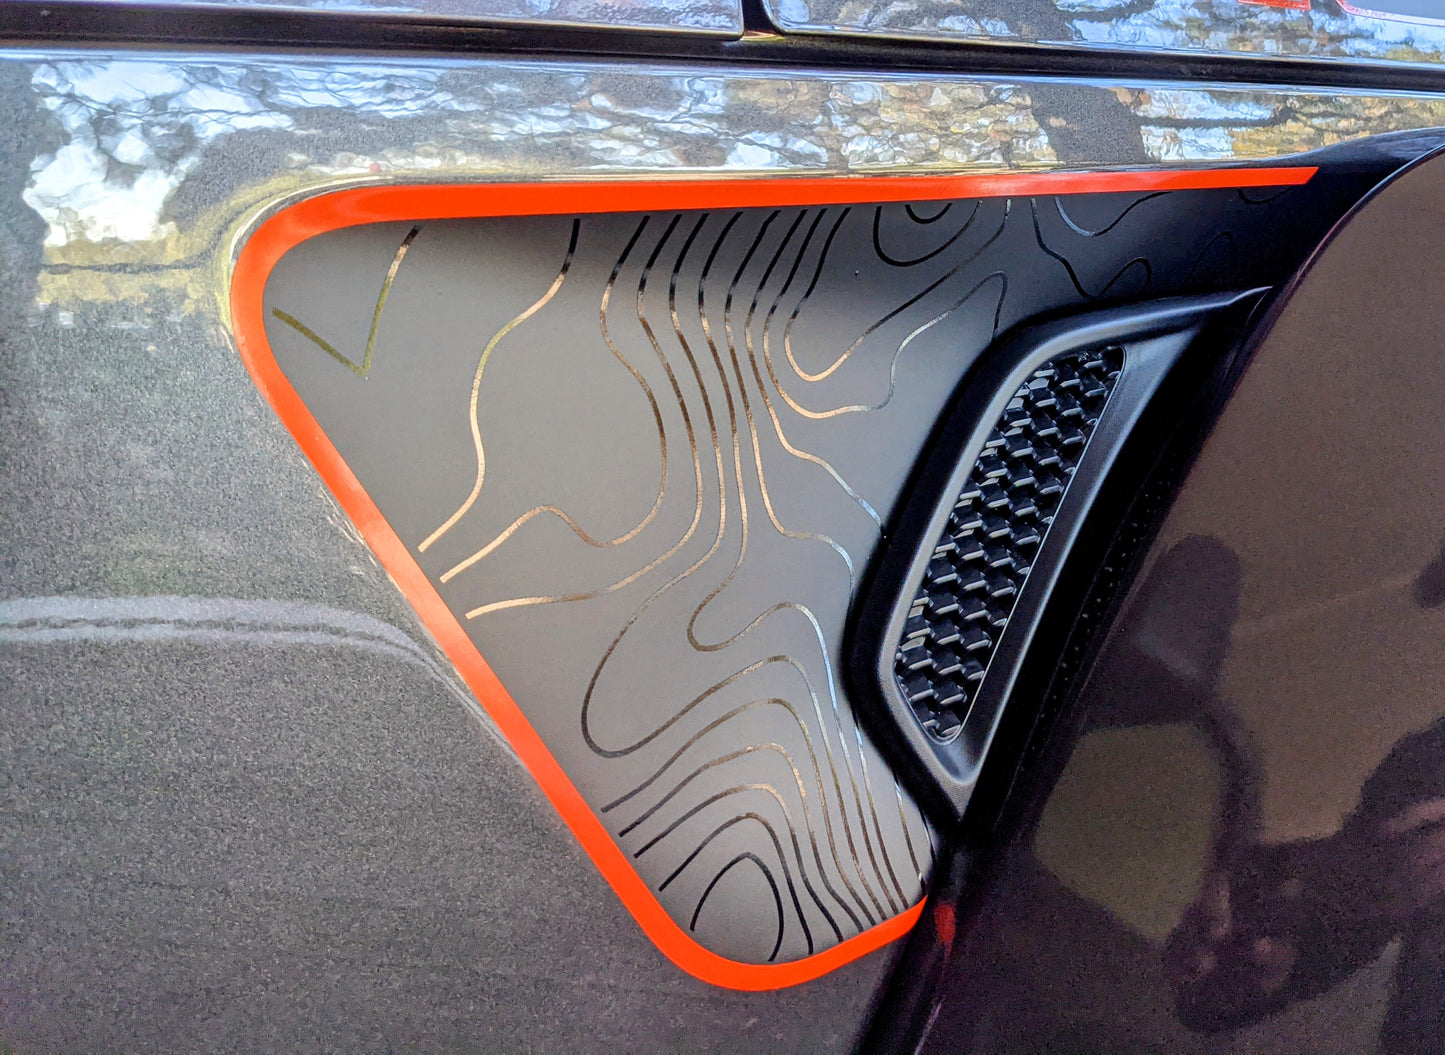 Topographical Red Line Rubicon Blackout Decal- Fits Jeep Wrangler & Gladiator JL Fender Vent Decal-Pair